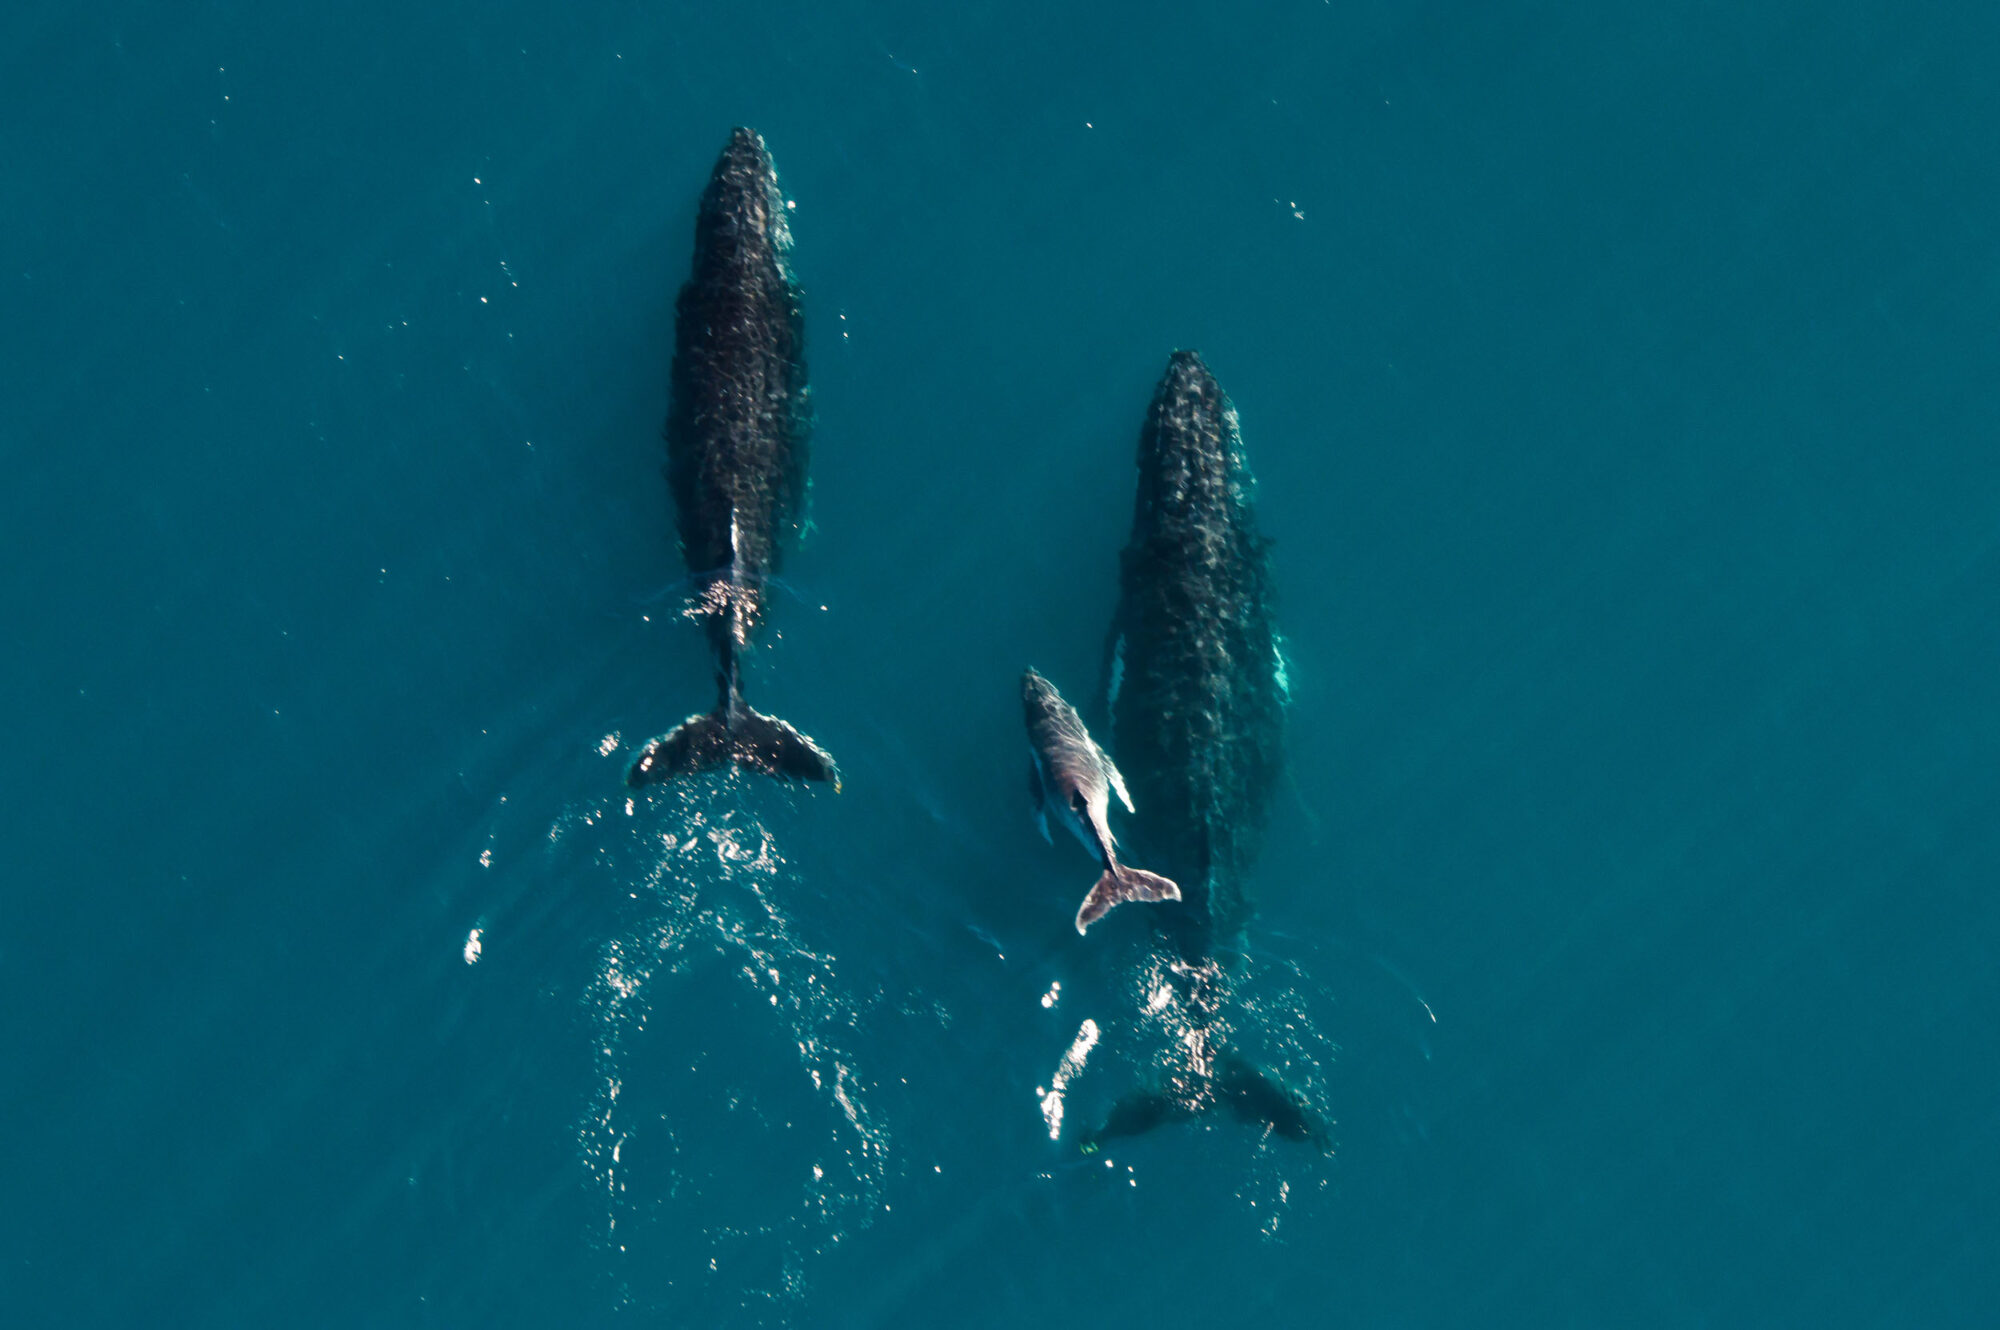 Two big whales with a baby whale happily jumping out of the water